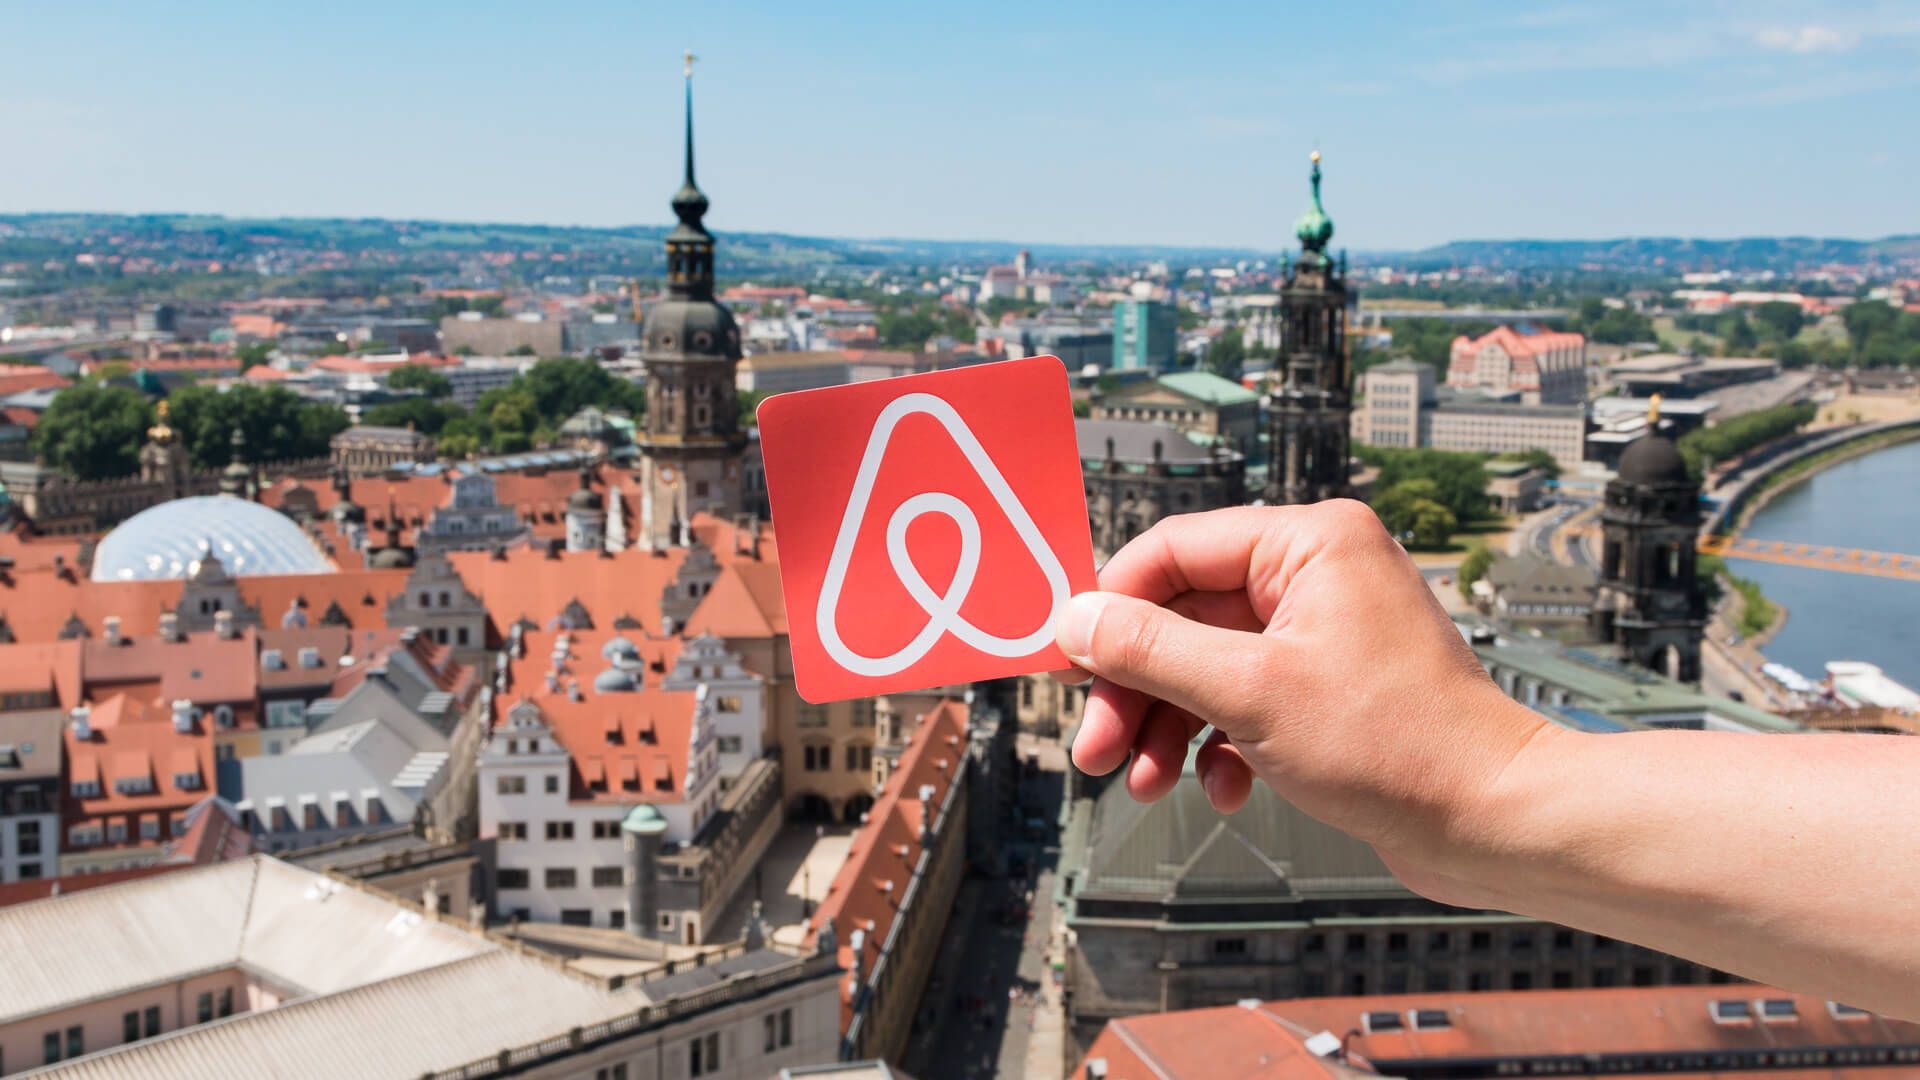 Airbnb predicts a significant recovery in tourism